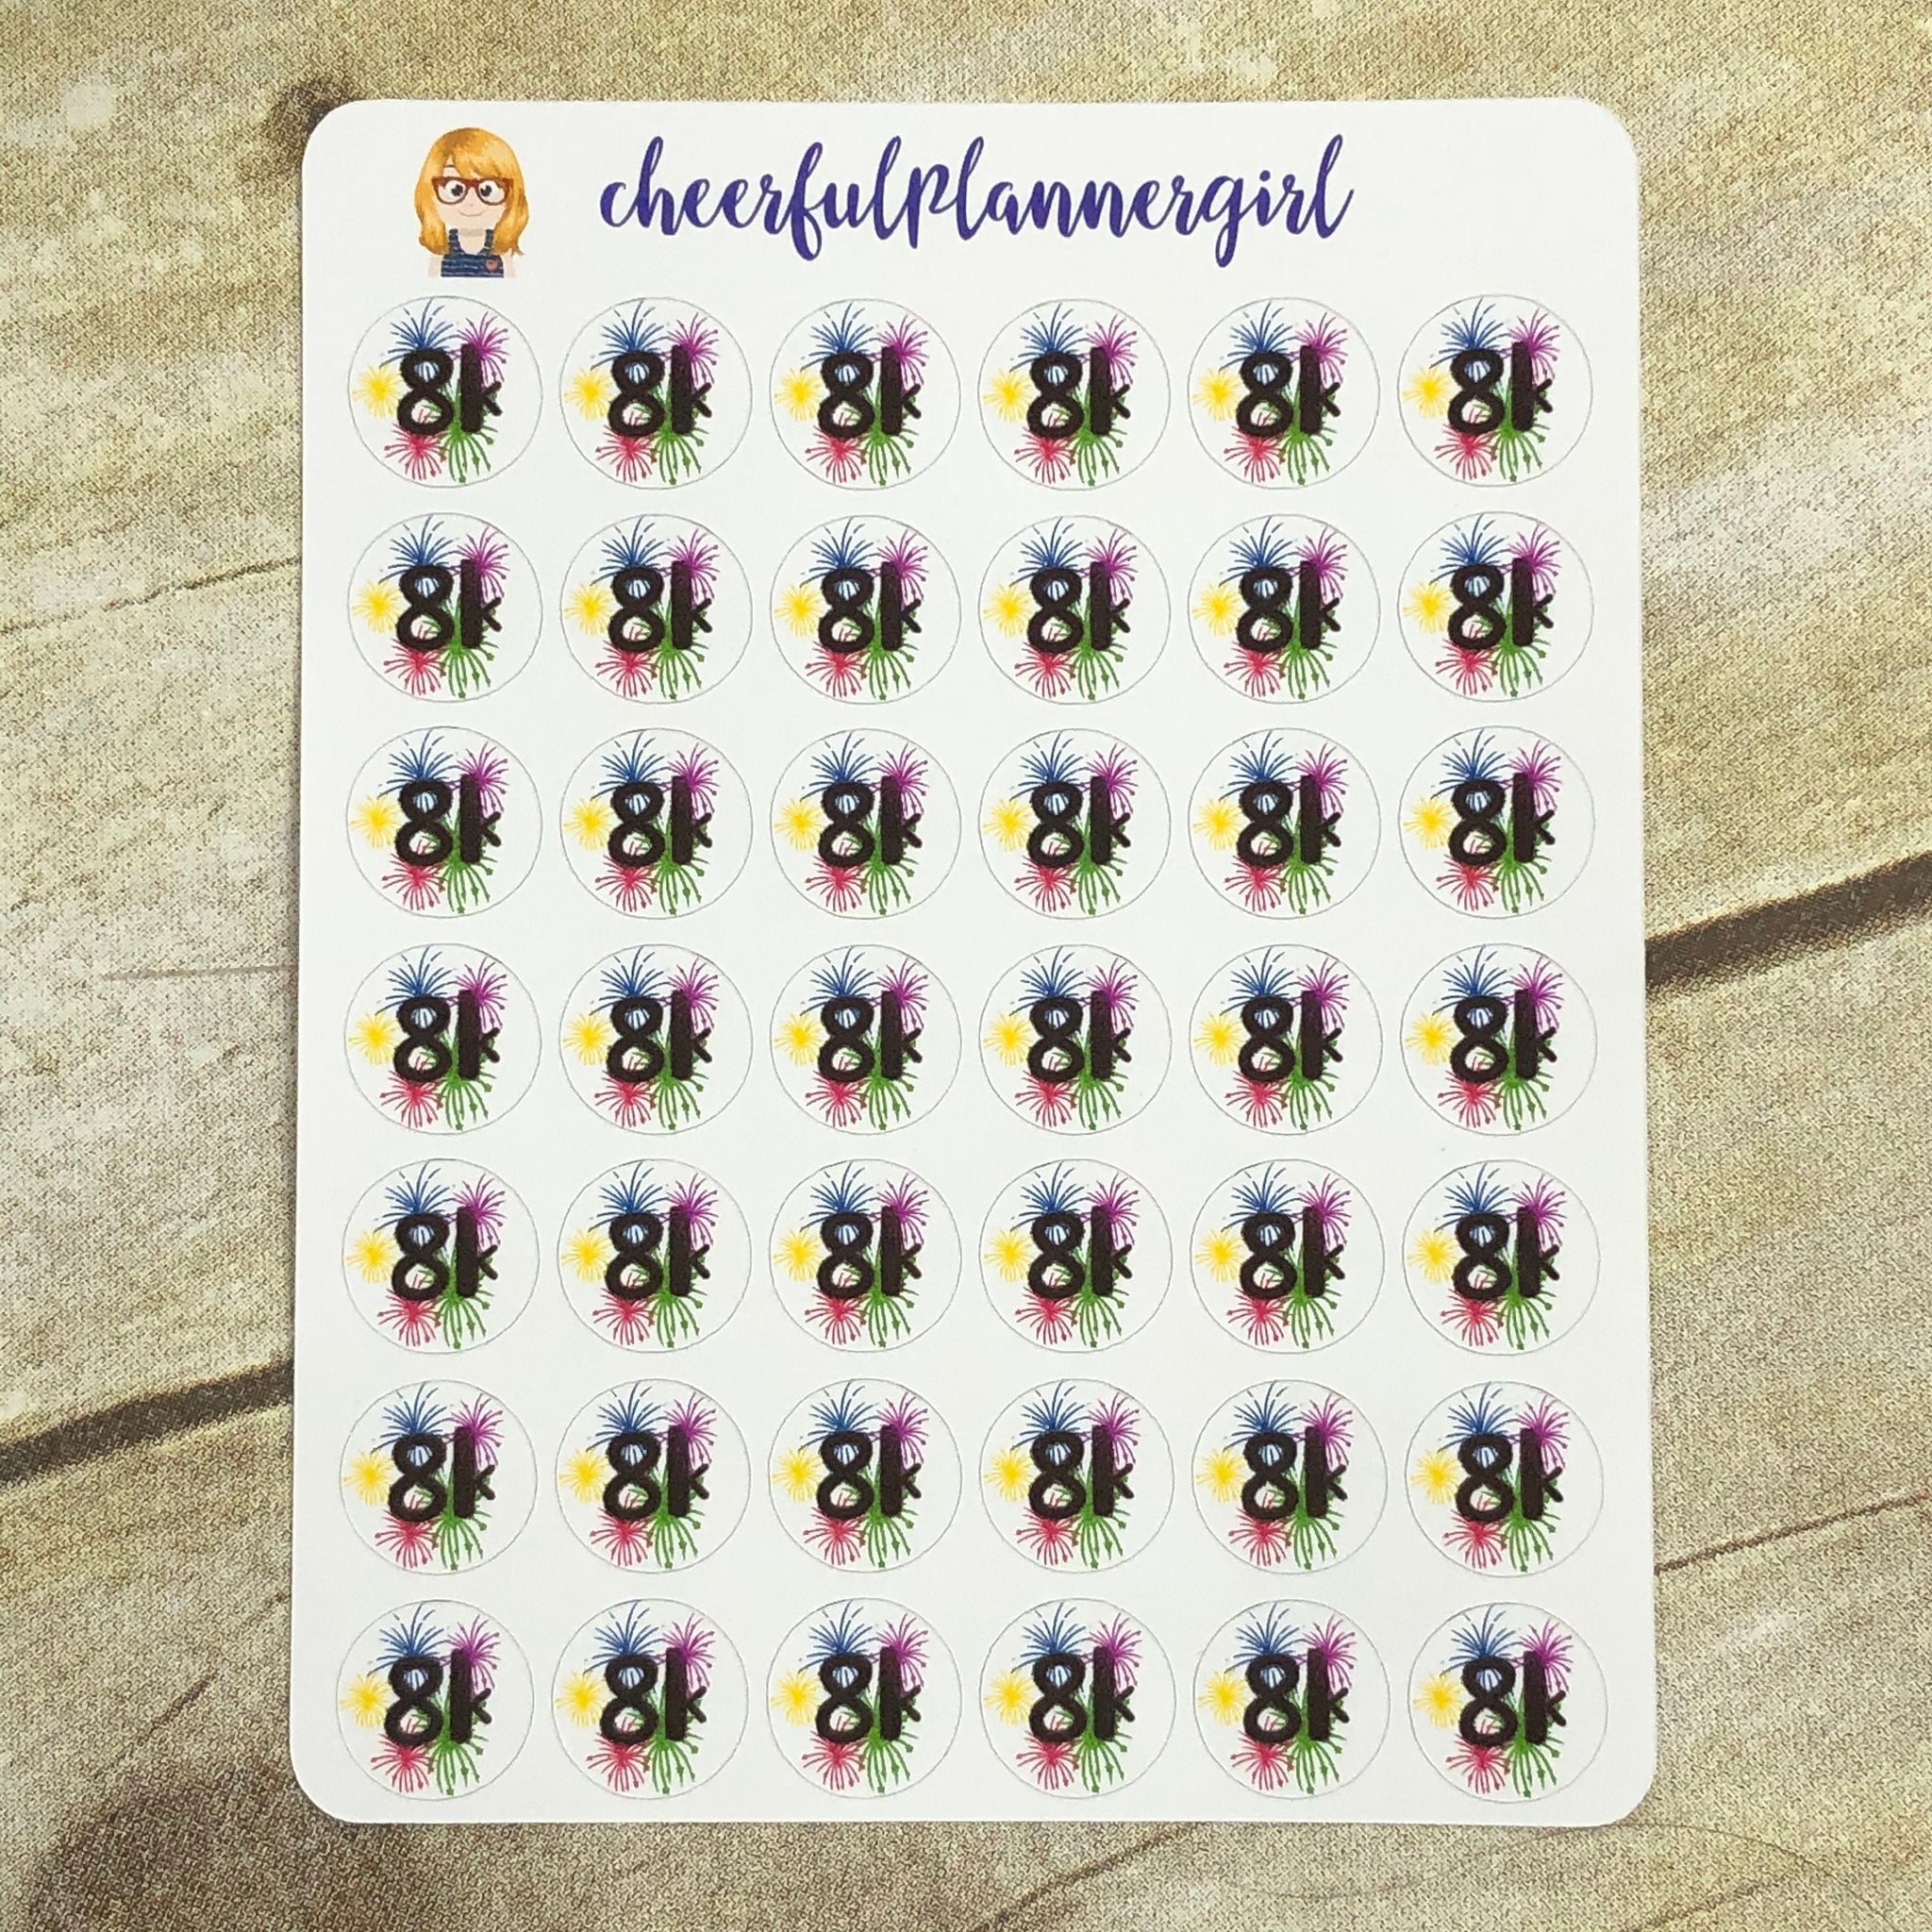 8k Step Goal Planner Stickers